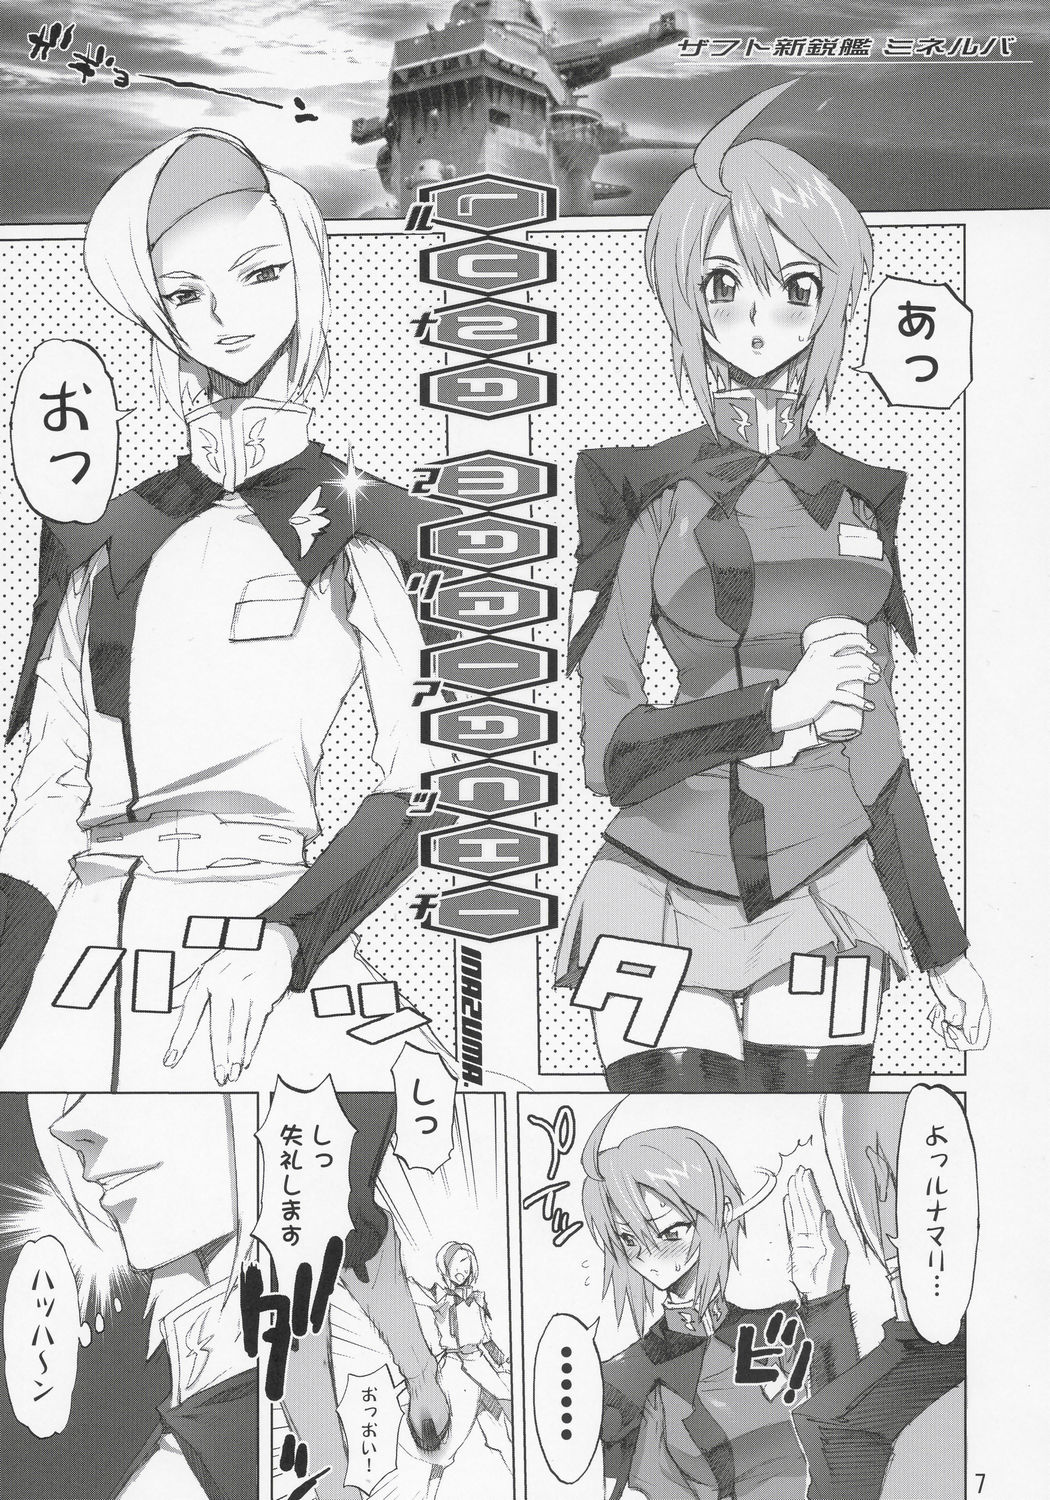 (C69) [Digital Accel Works] Inazuma Warrior 2 (Various) page 6 full